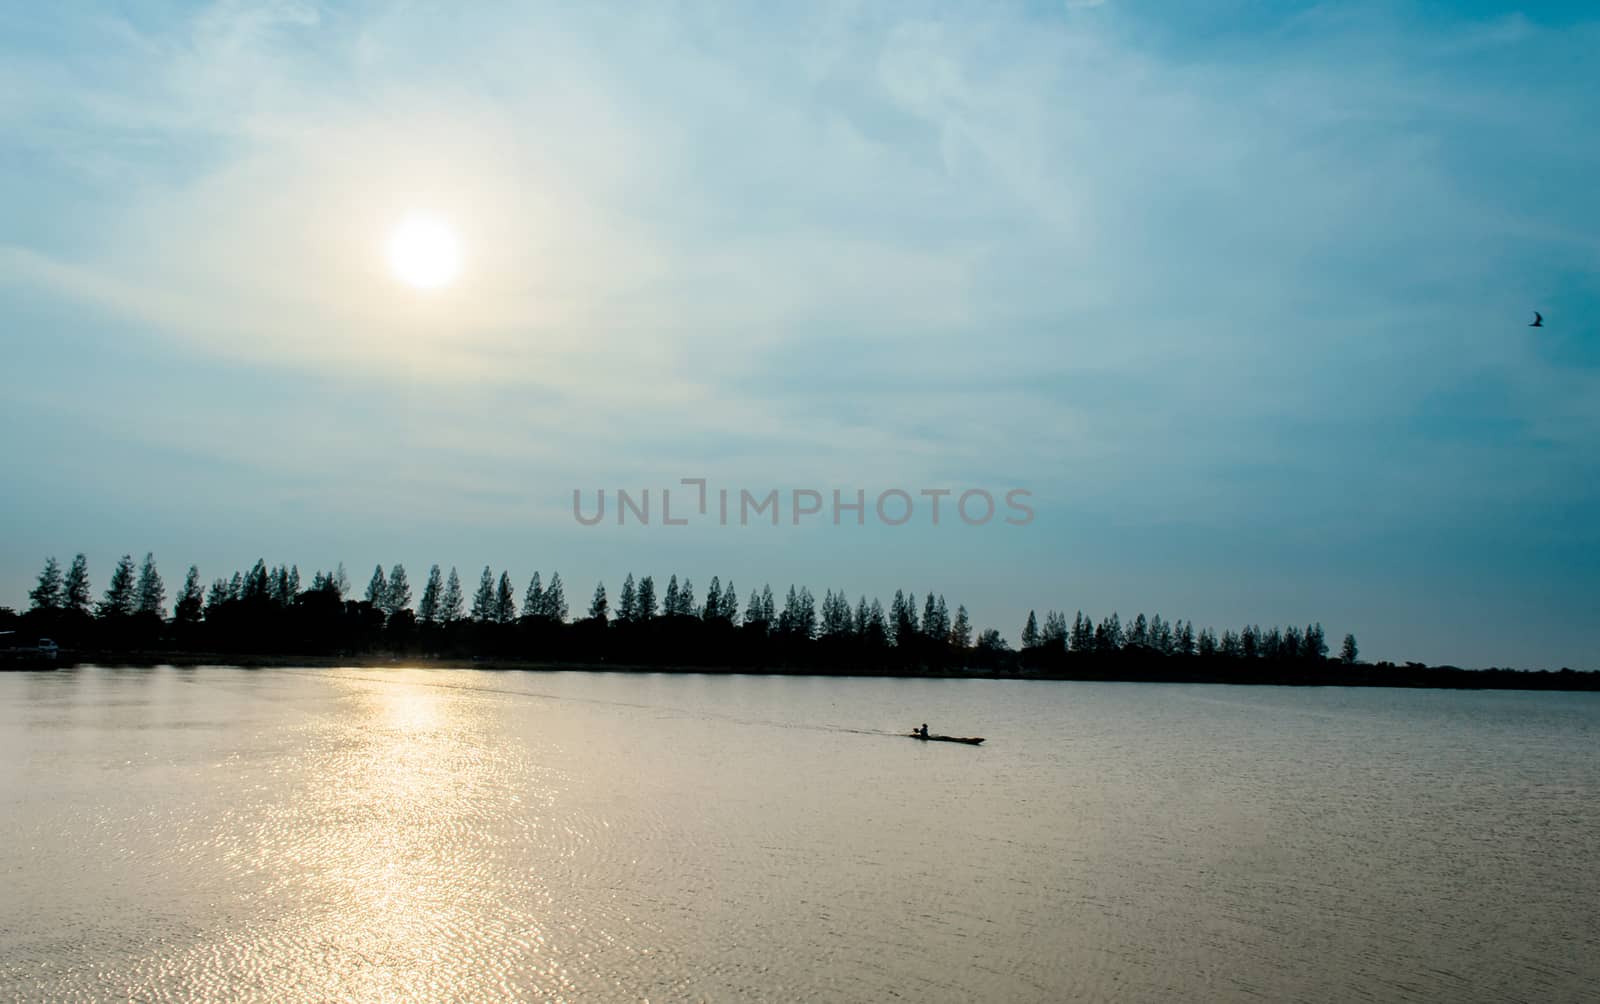 The Fisherman Boat and Morning Sunrise on River in Thailand.